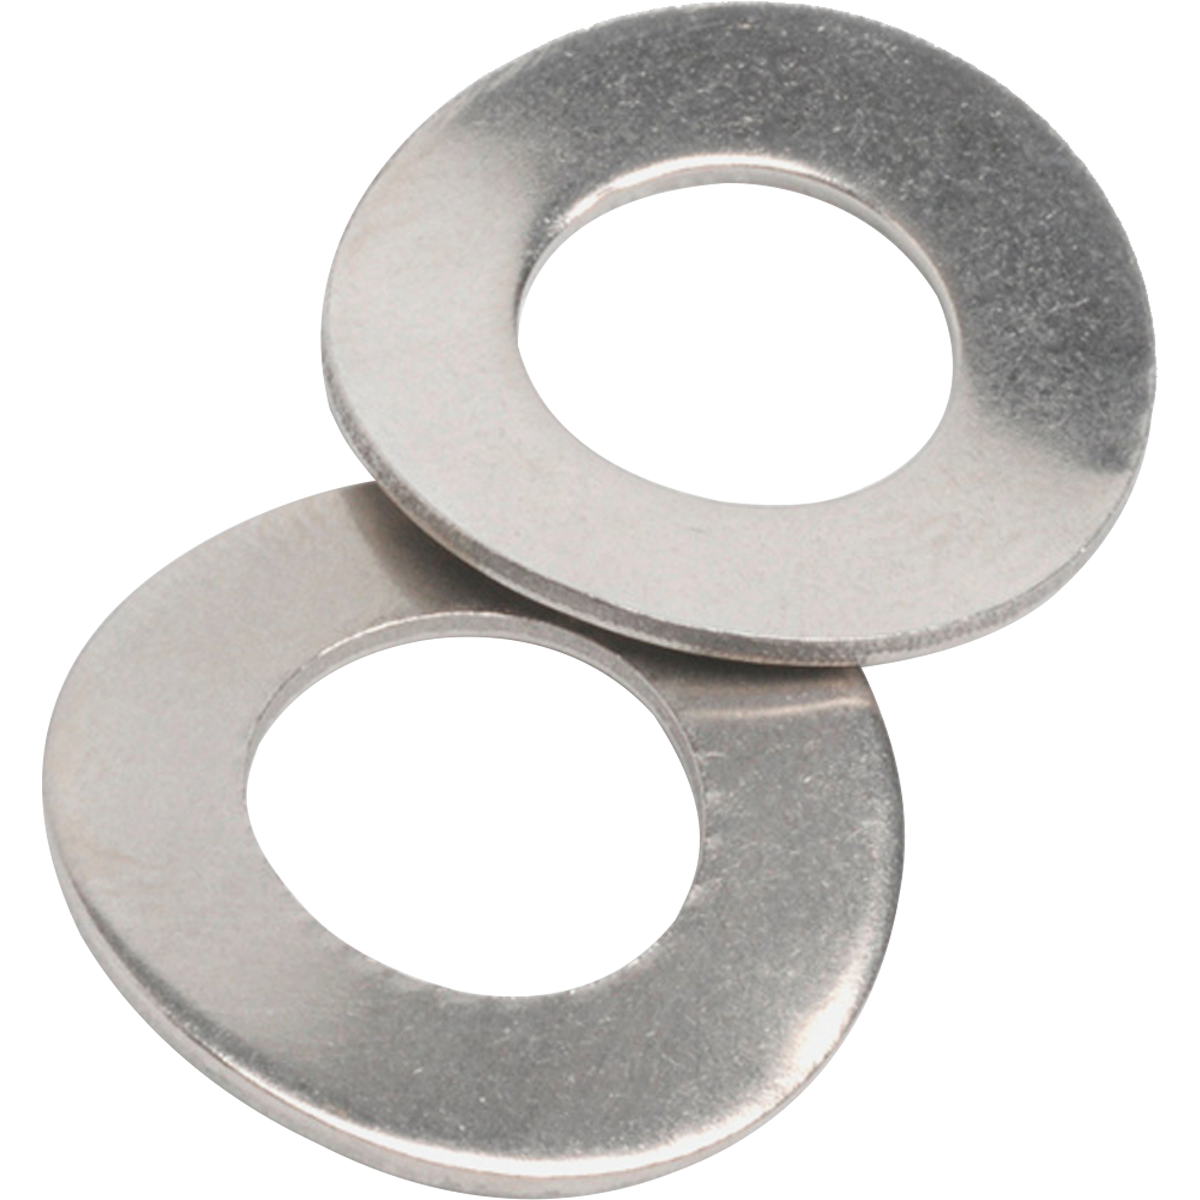 Metric, Wave Washers, are manufactured from A1 stainless steel and are available in various diameters at competitive prices.